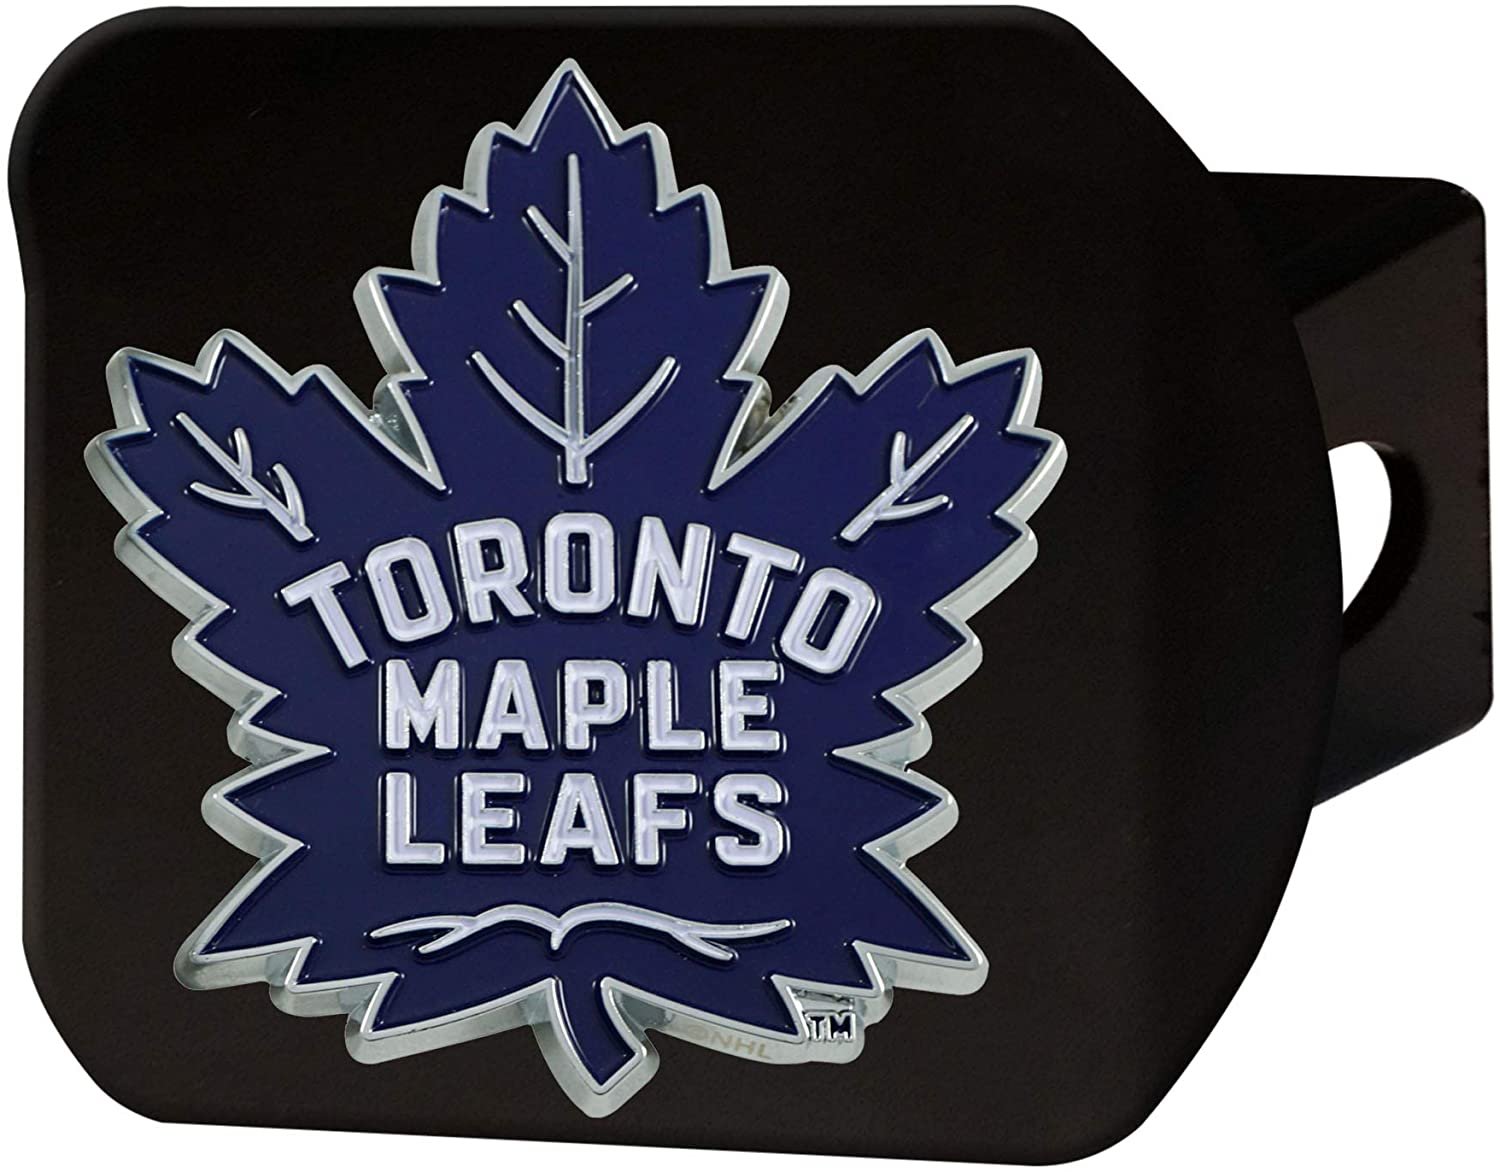 Toronto Maple Leafs Solid Black Metal Hitch Cover with Metal Emblem 2 Inch Square Type III